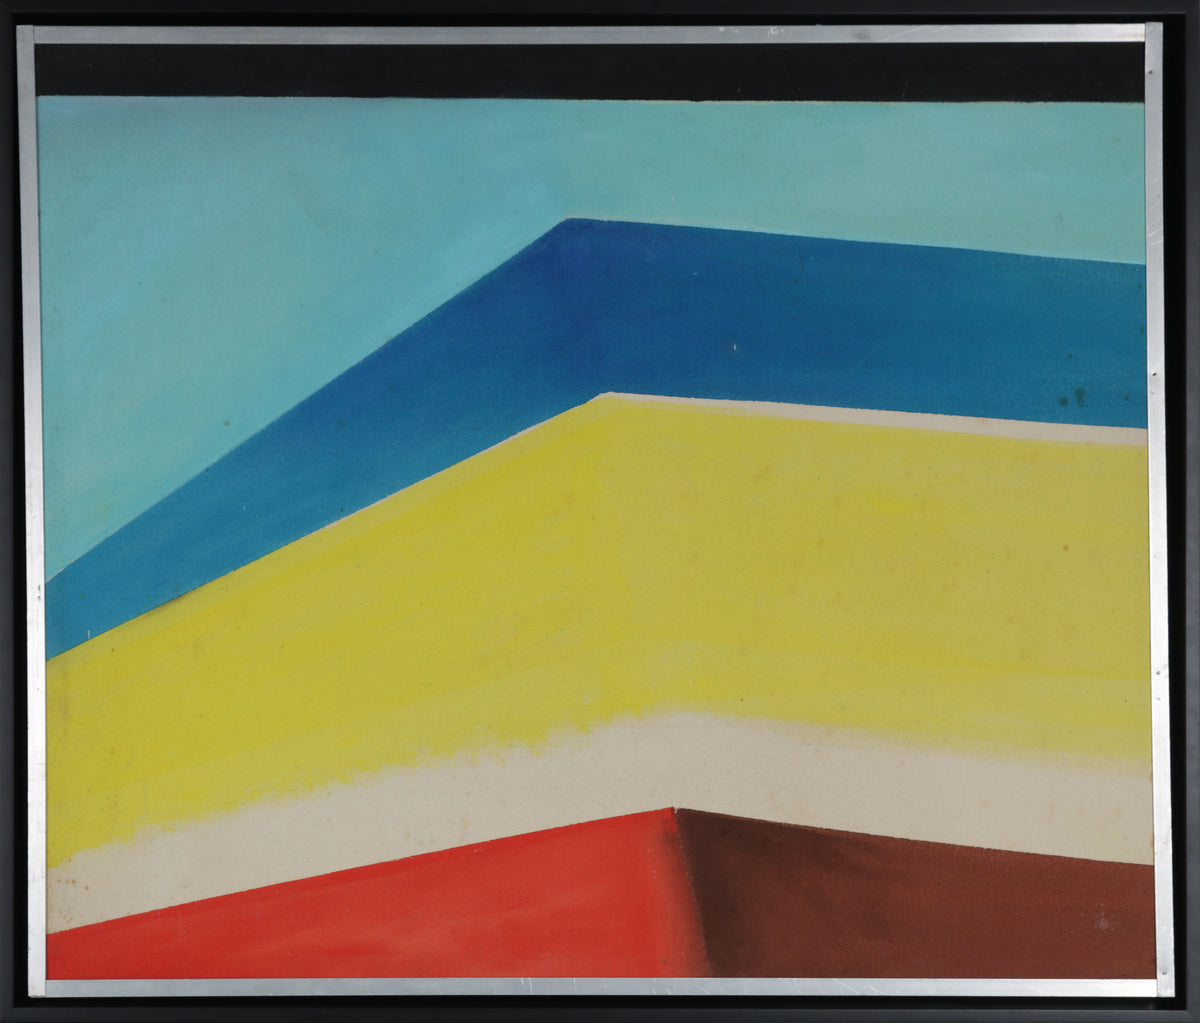 Blue, Yellow Red Chevron Bands &lt;br&gt;1974 Acrylic on Canvas &lt;br&gt;&lt;br&gt;#B5611